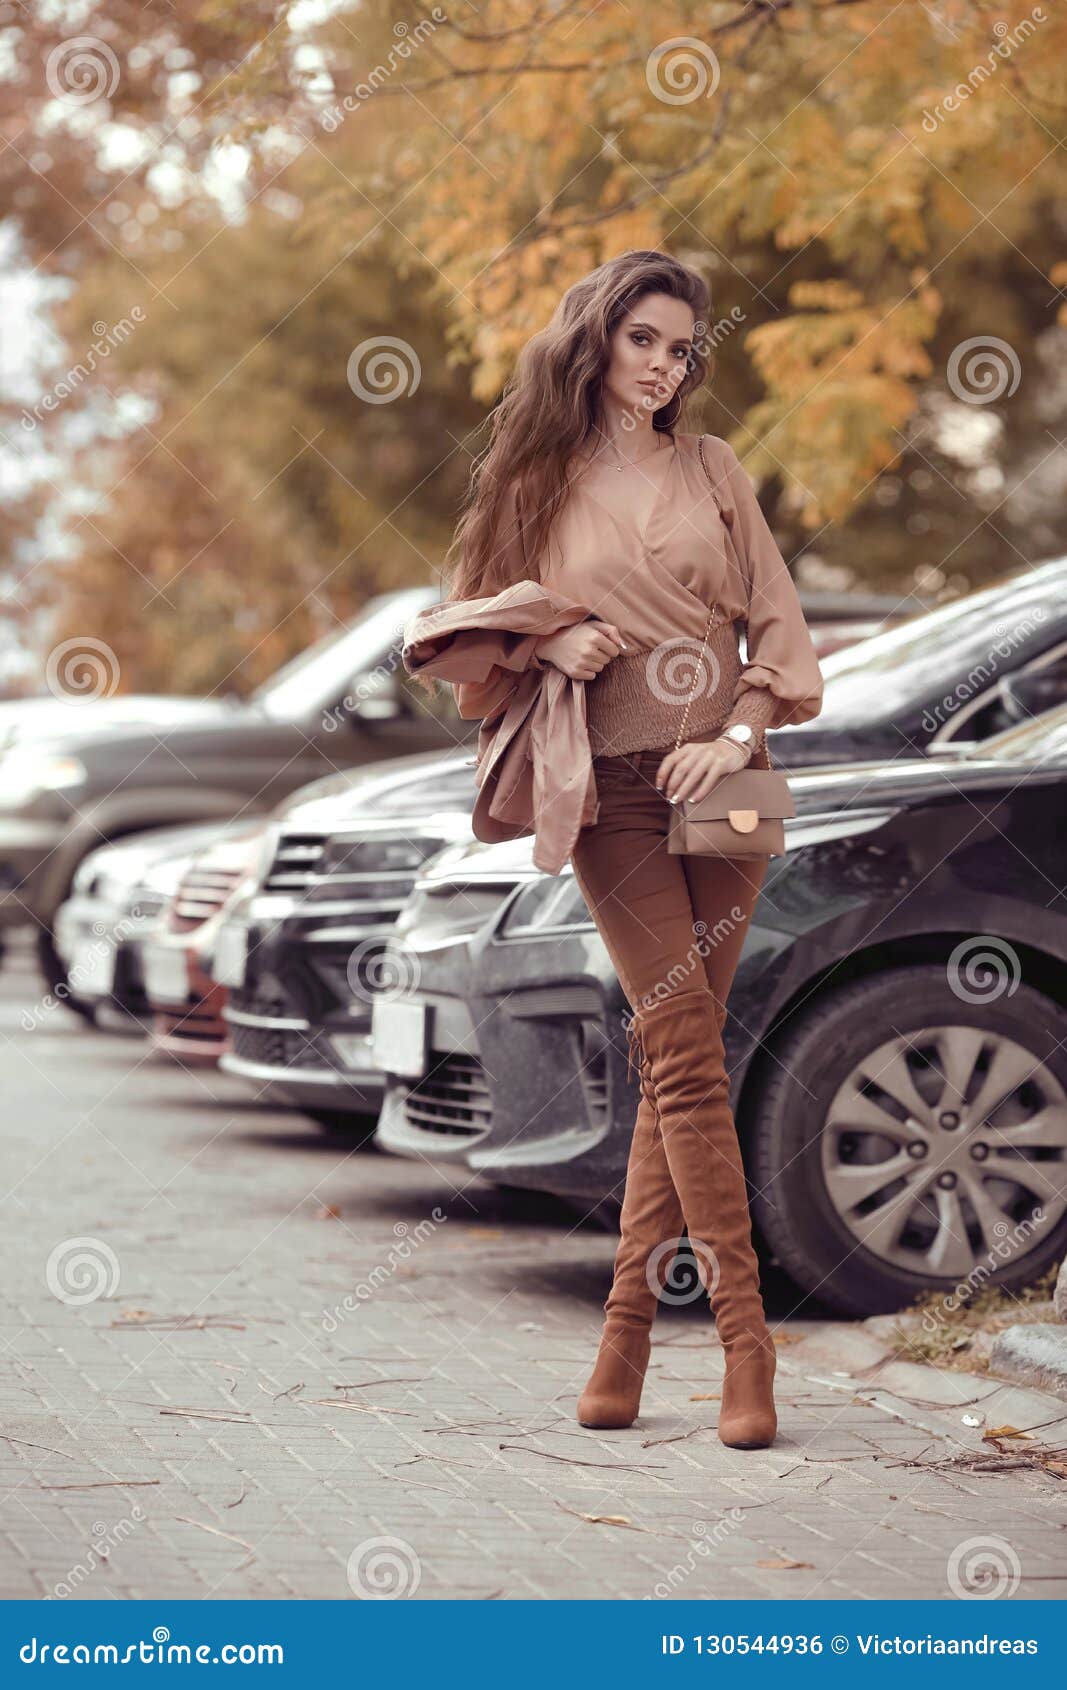 attractive woman in autumn style trendy outfit walking in street